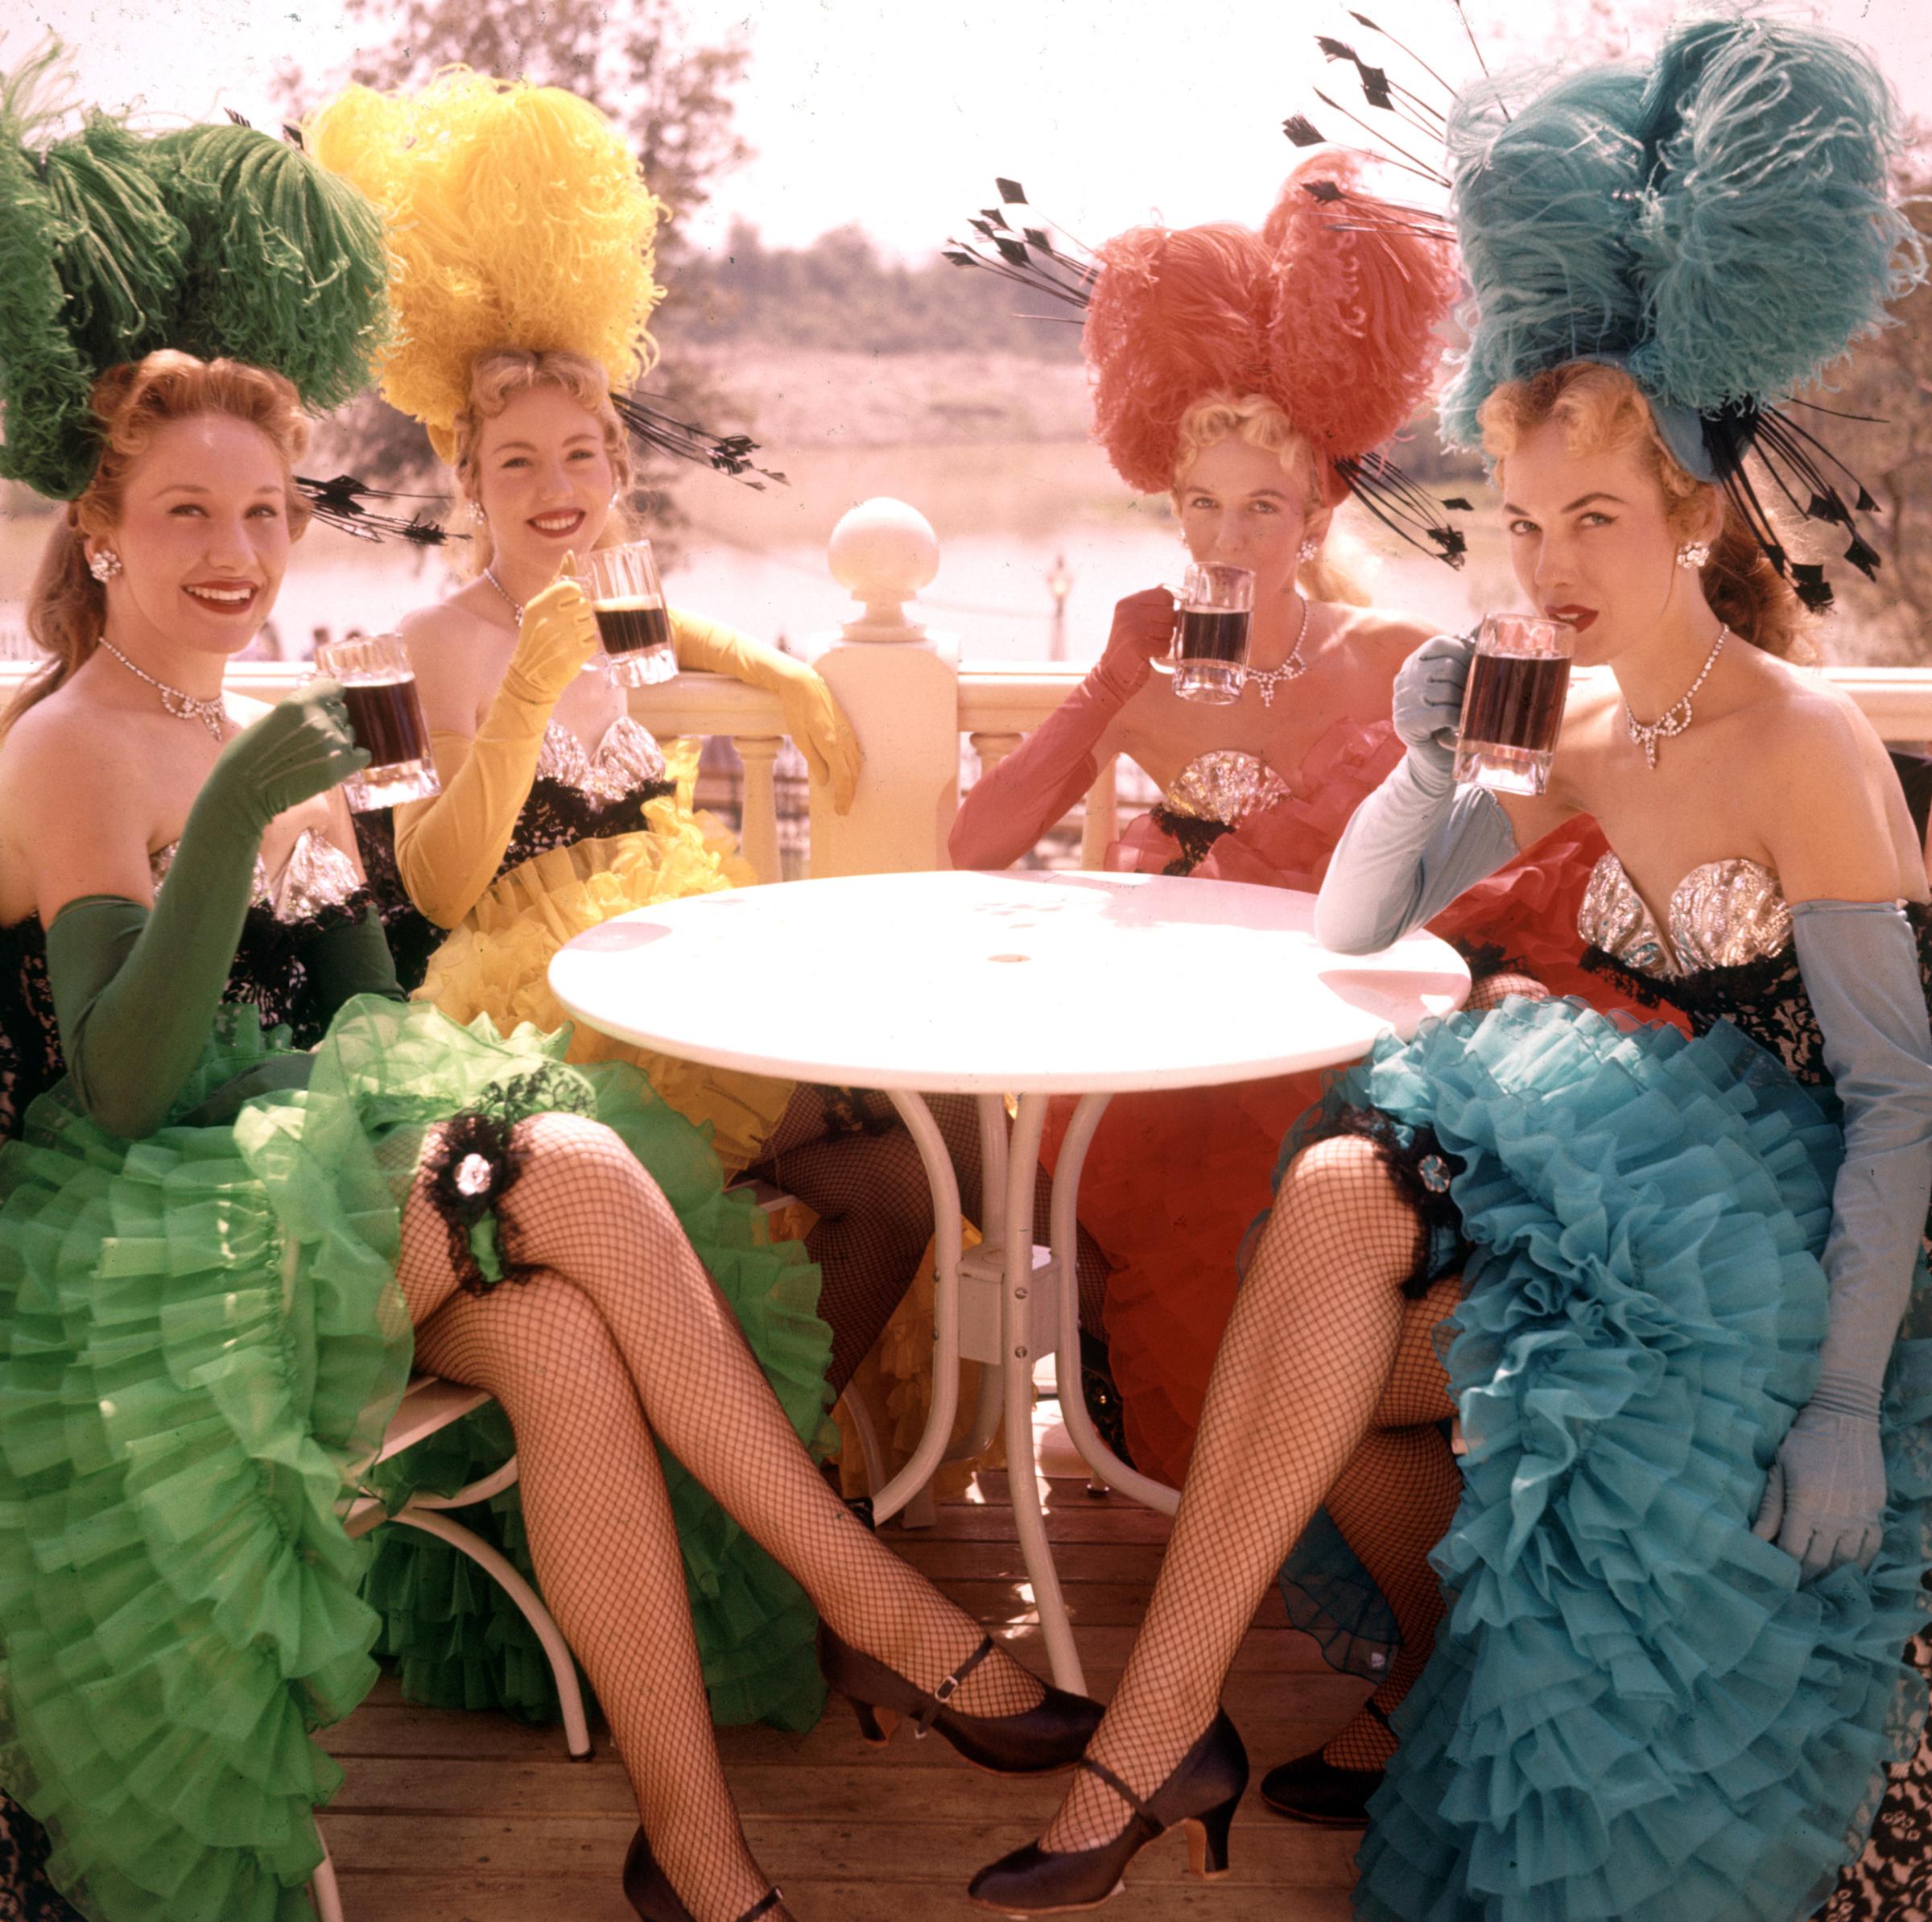 Showgirl performers taking a break and having a drink at Disneyland Amusement Park, 1955.